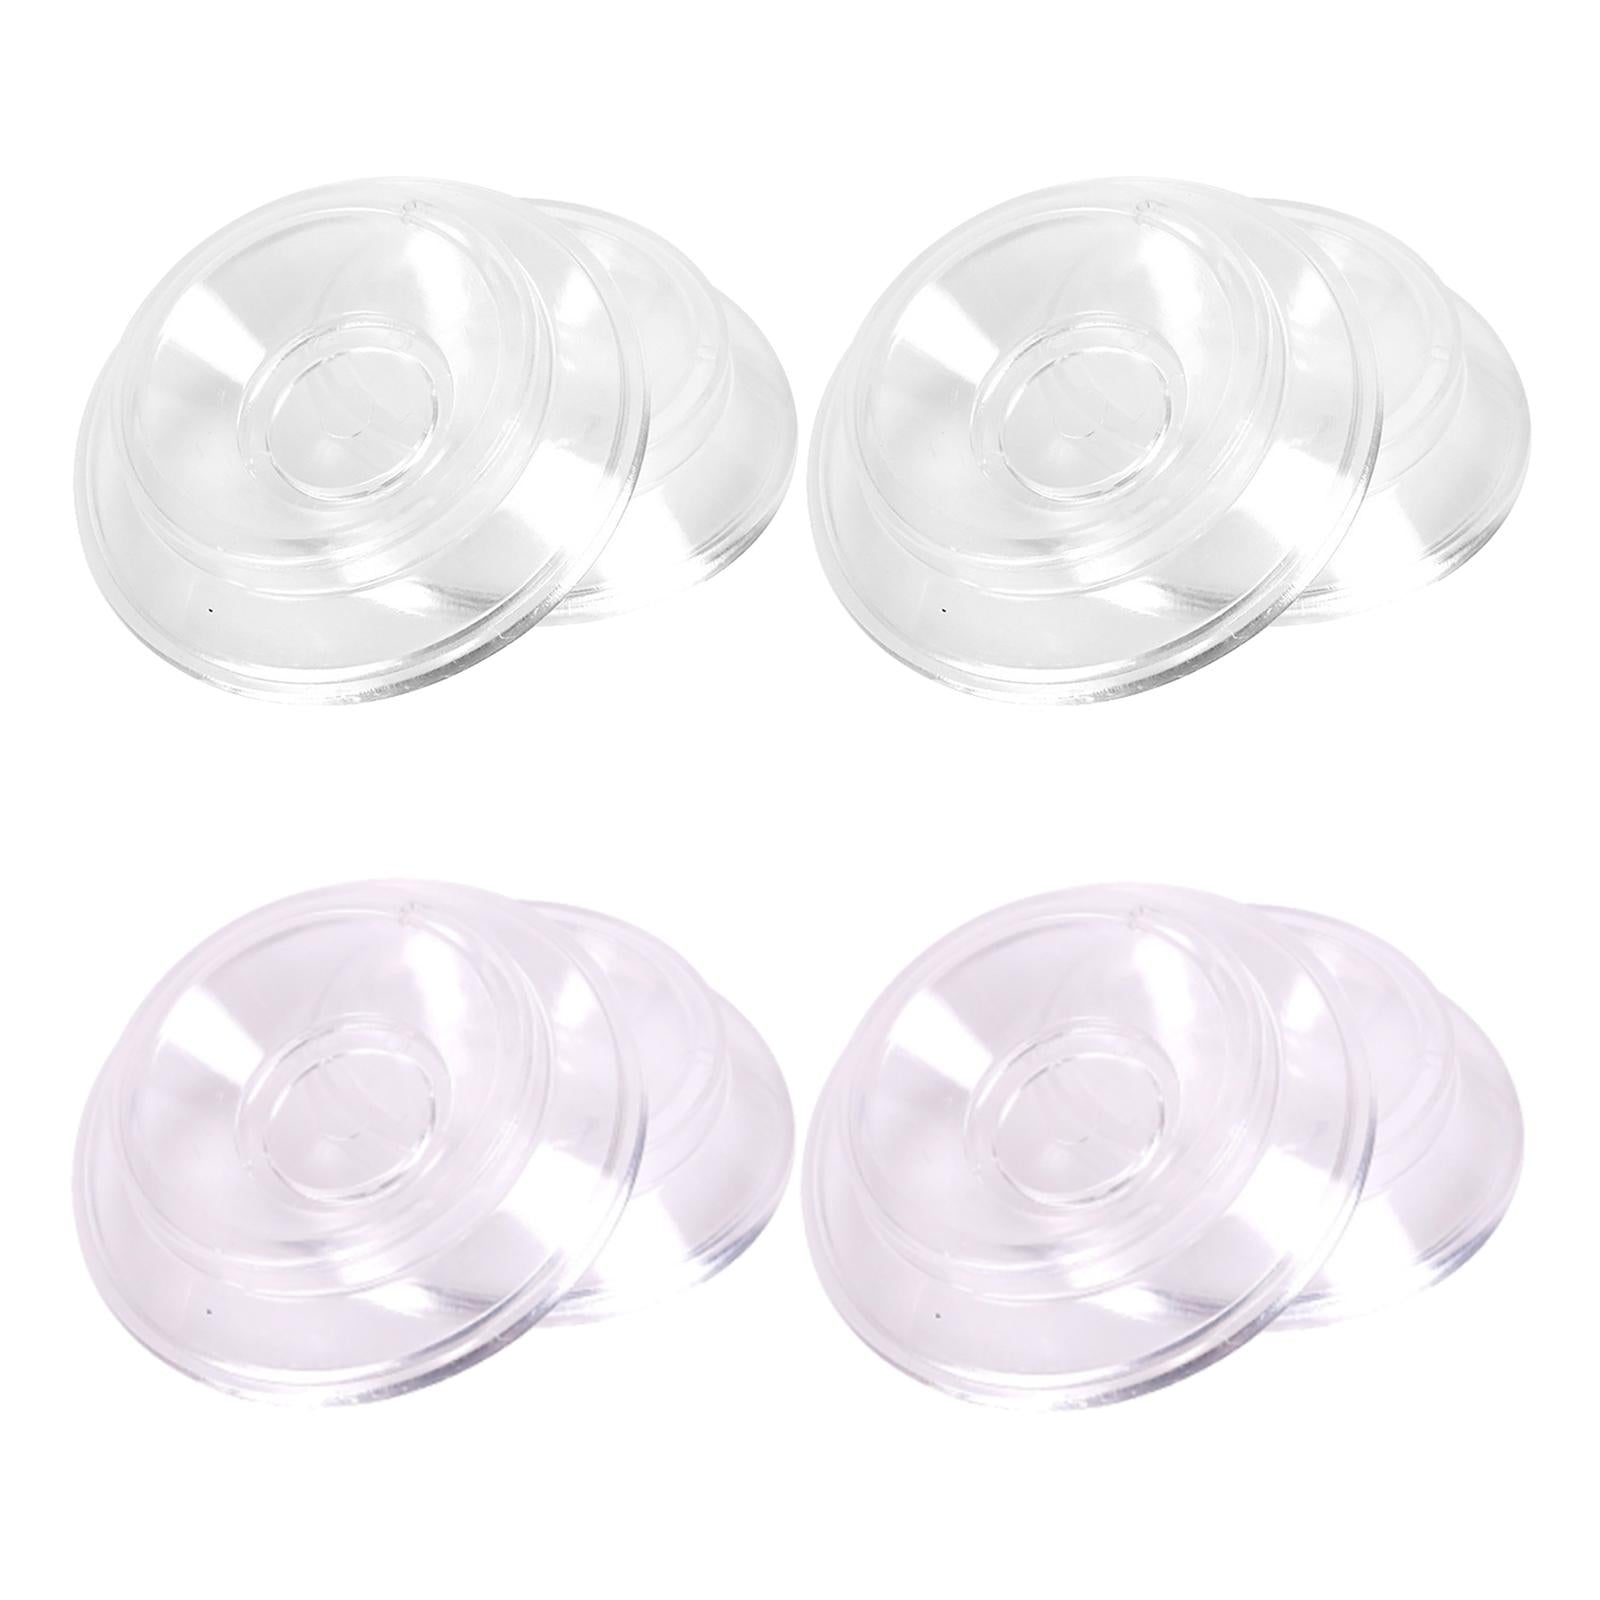 4x Piano Caster Cups High Quality Protection Solid Upright Premium ABS White